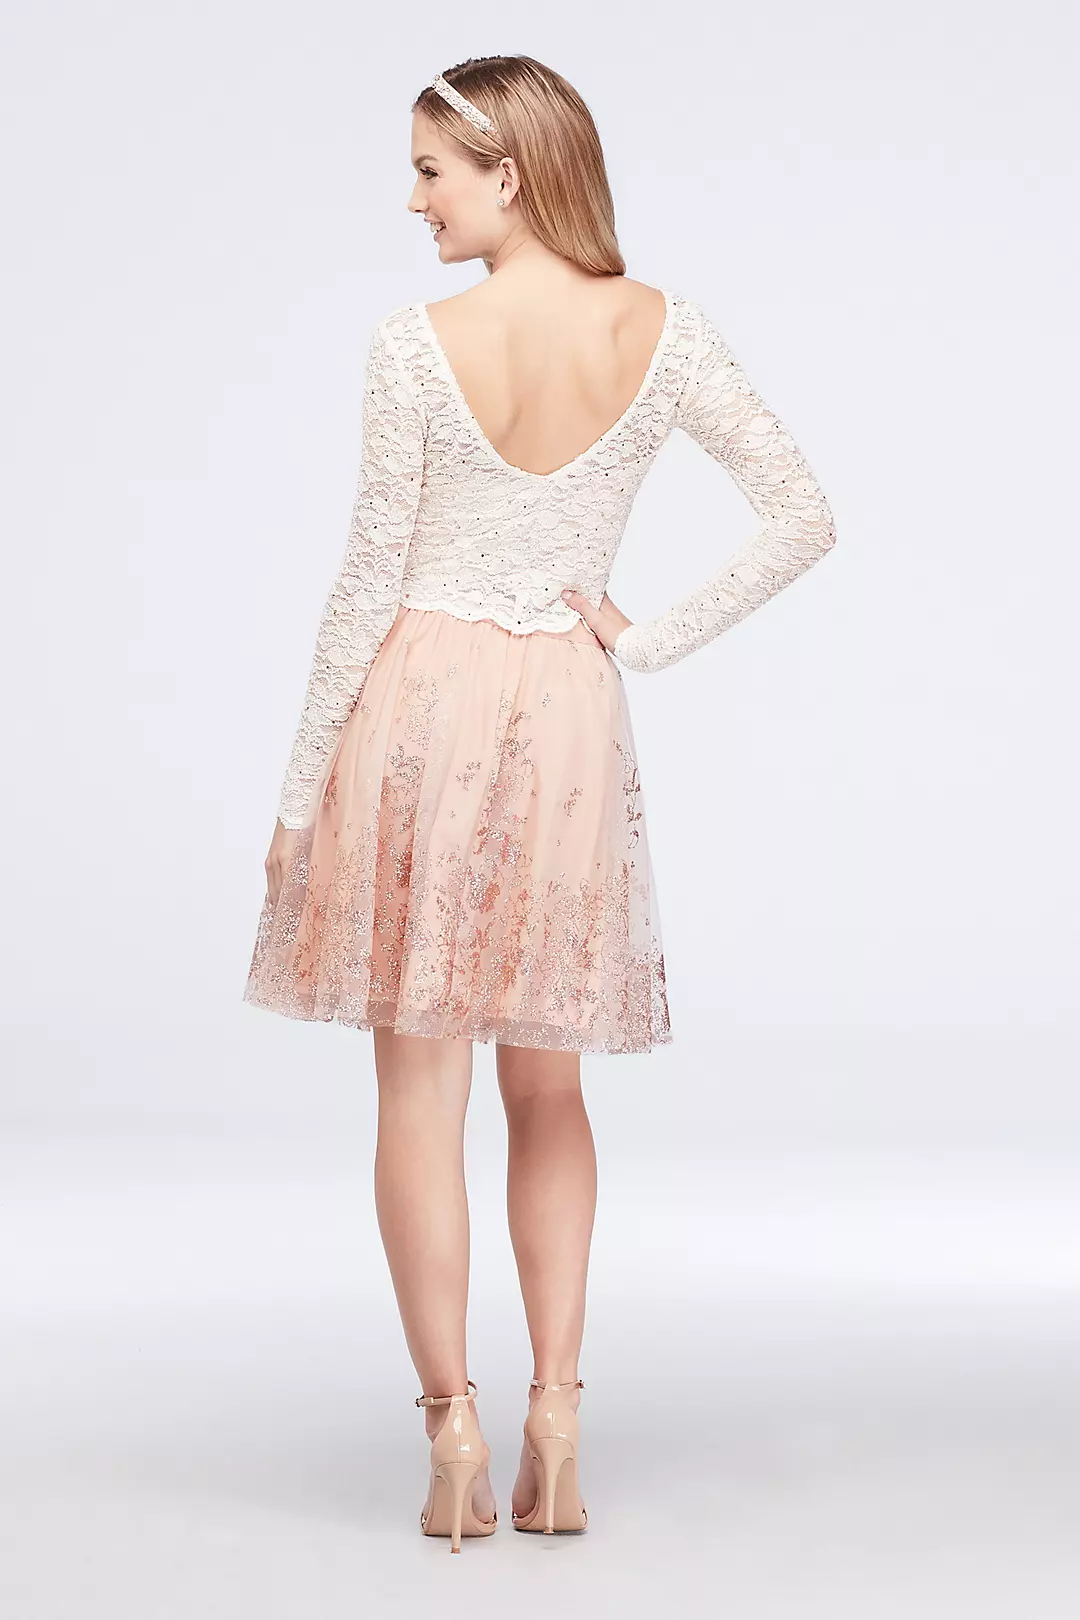 Lace and Floral Glitter Two-Piece Dress Image 2